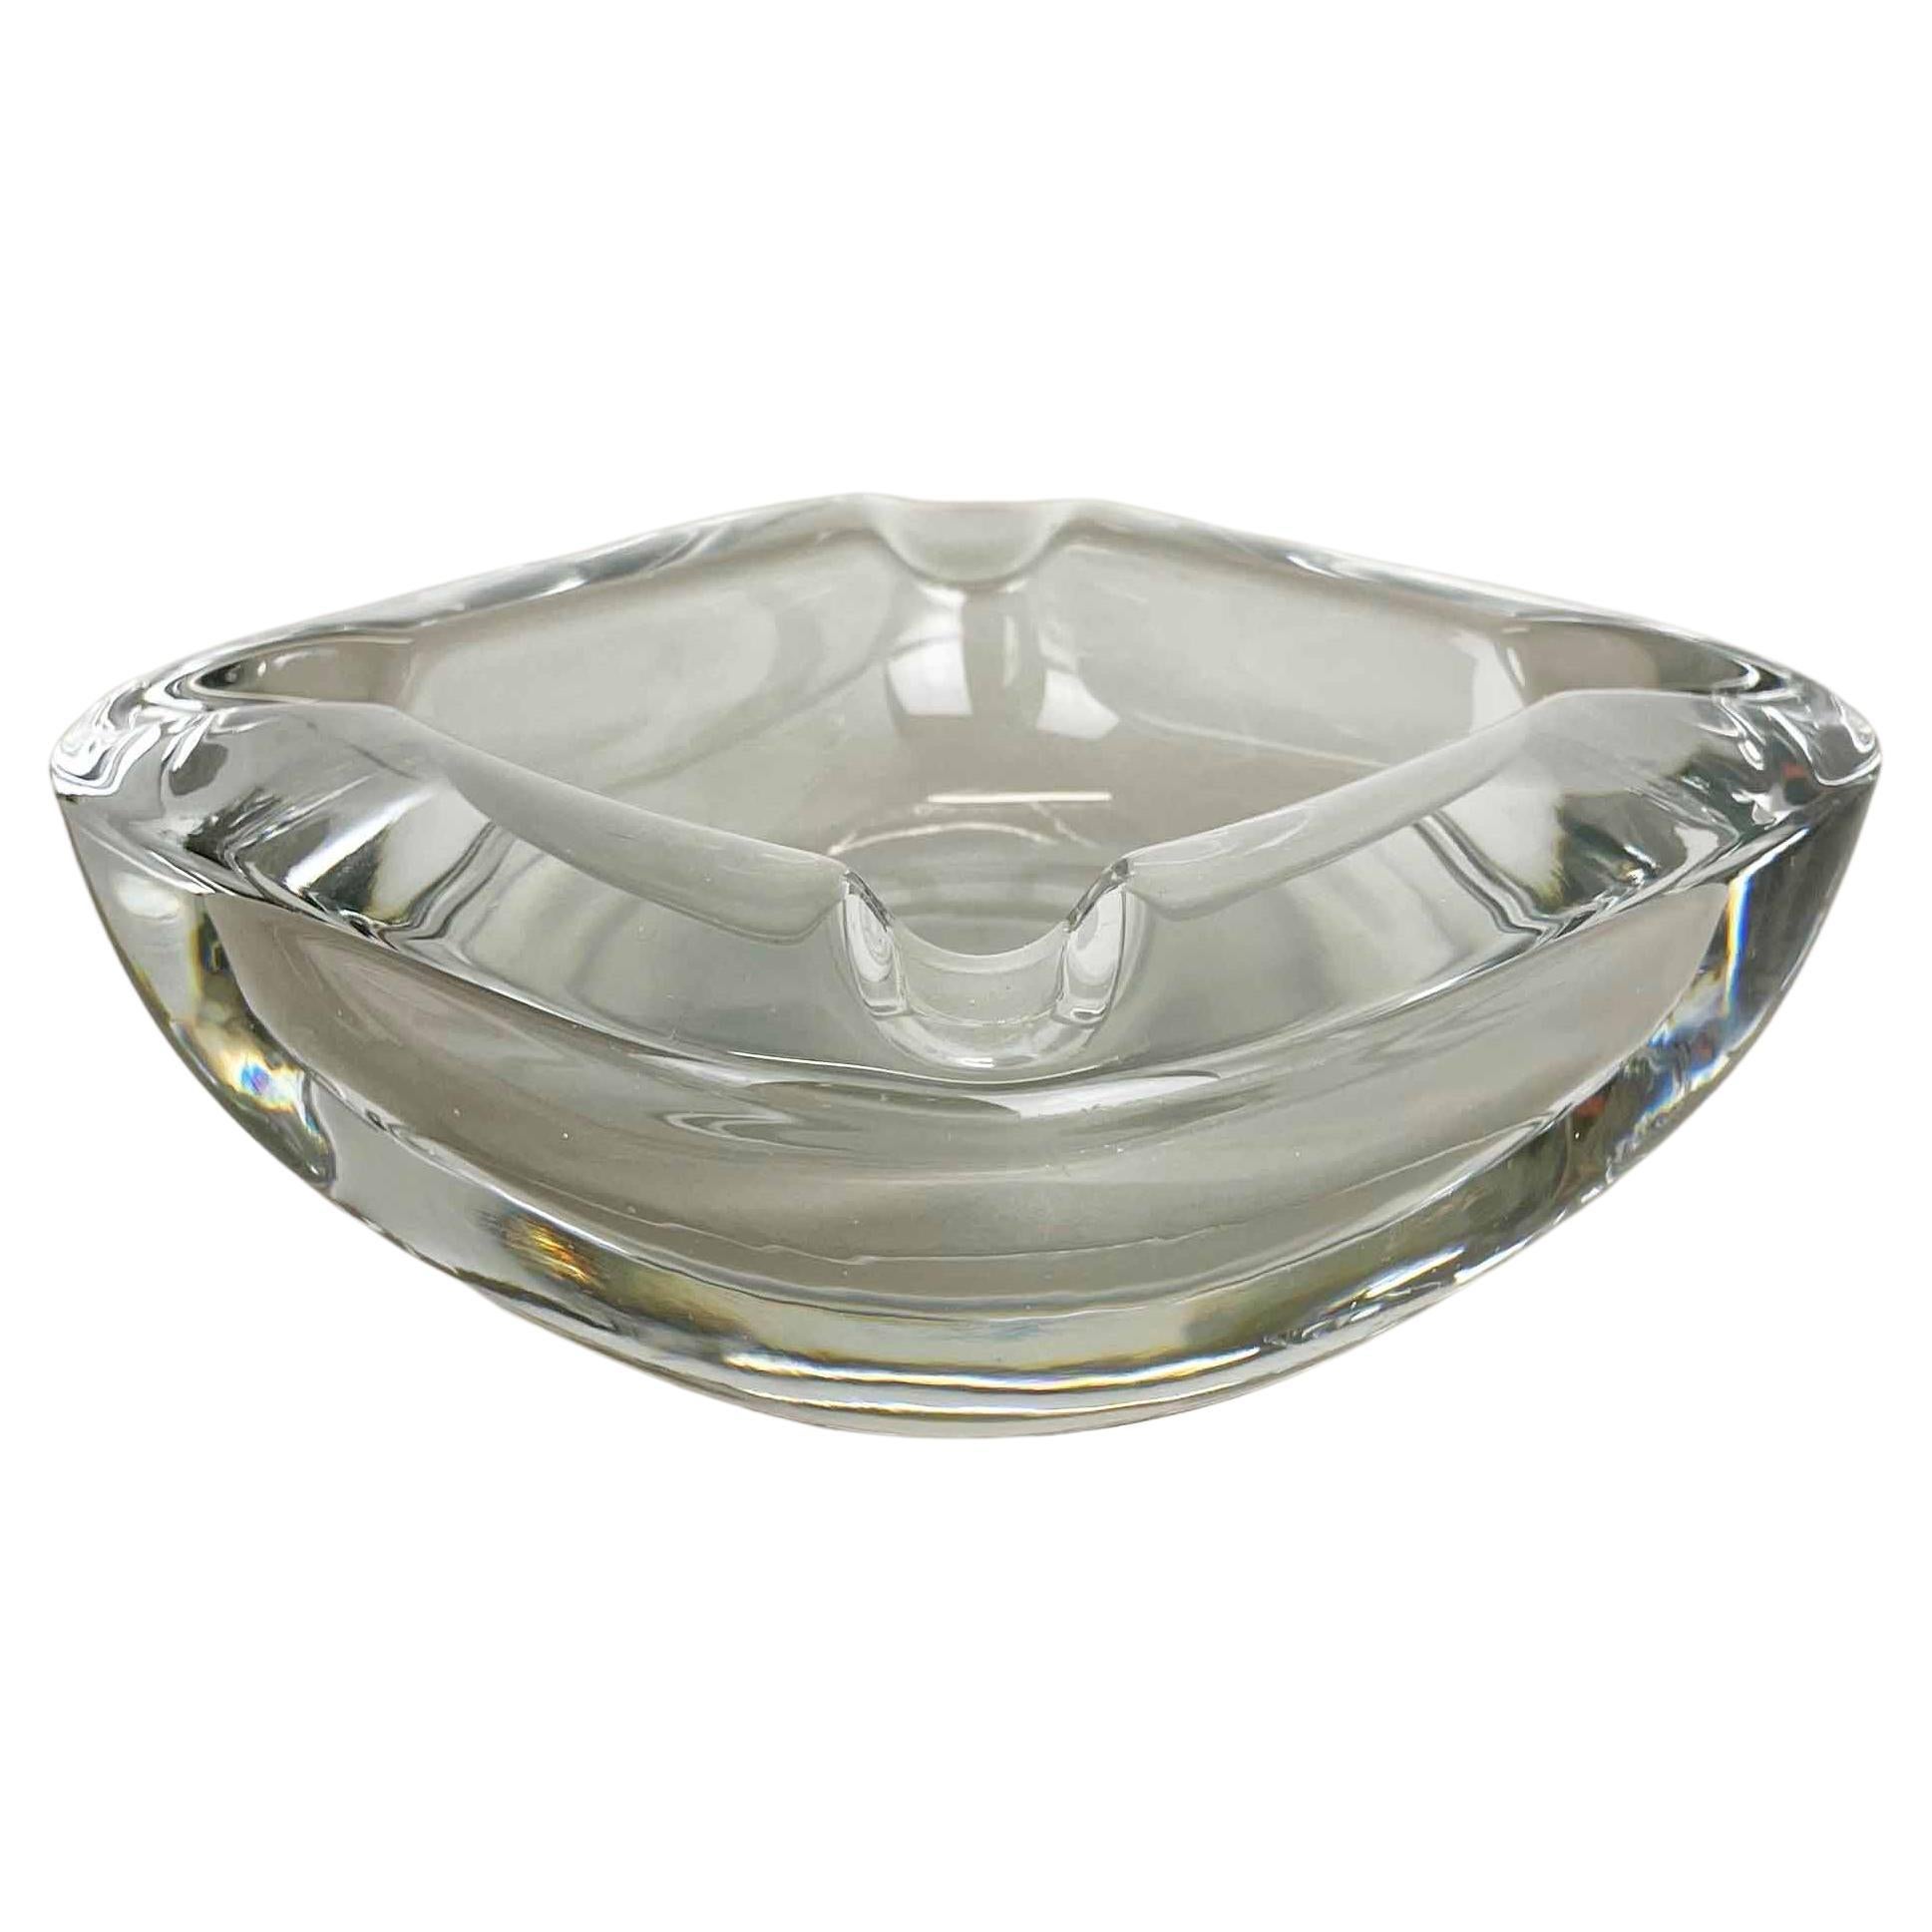 Large 1, 8kg French "Lucid" Crystal Glass Shell Ashtray by Art Vannes France 1970